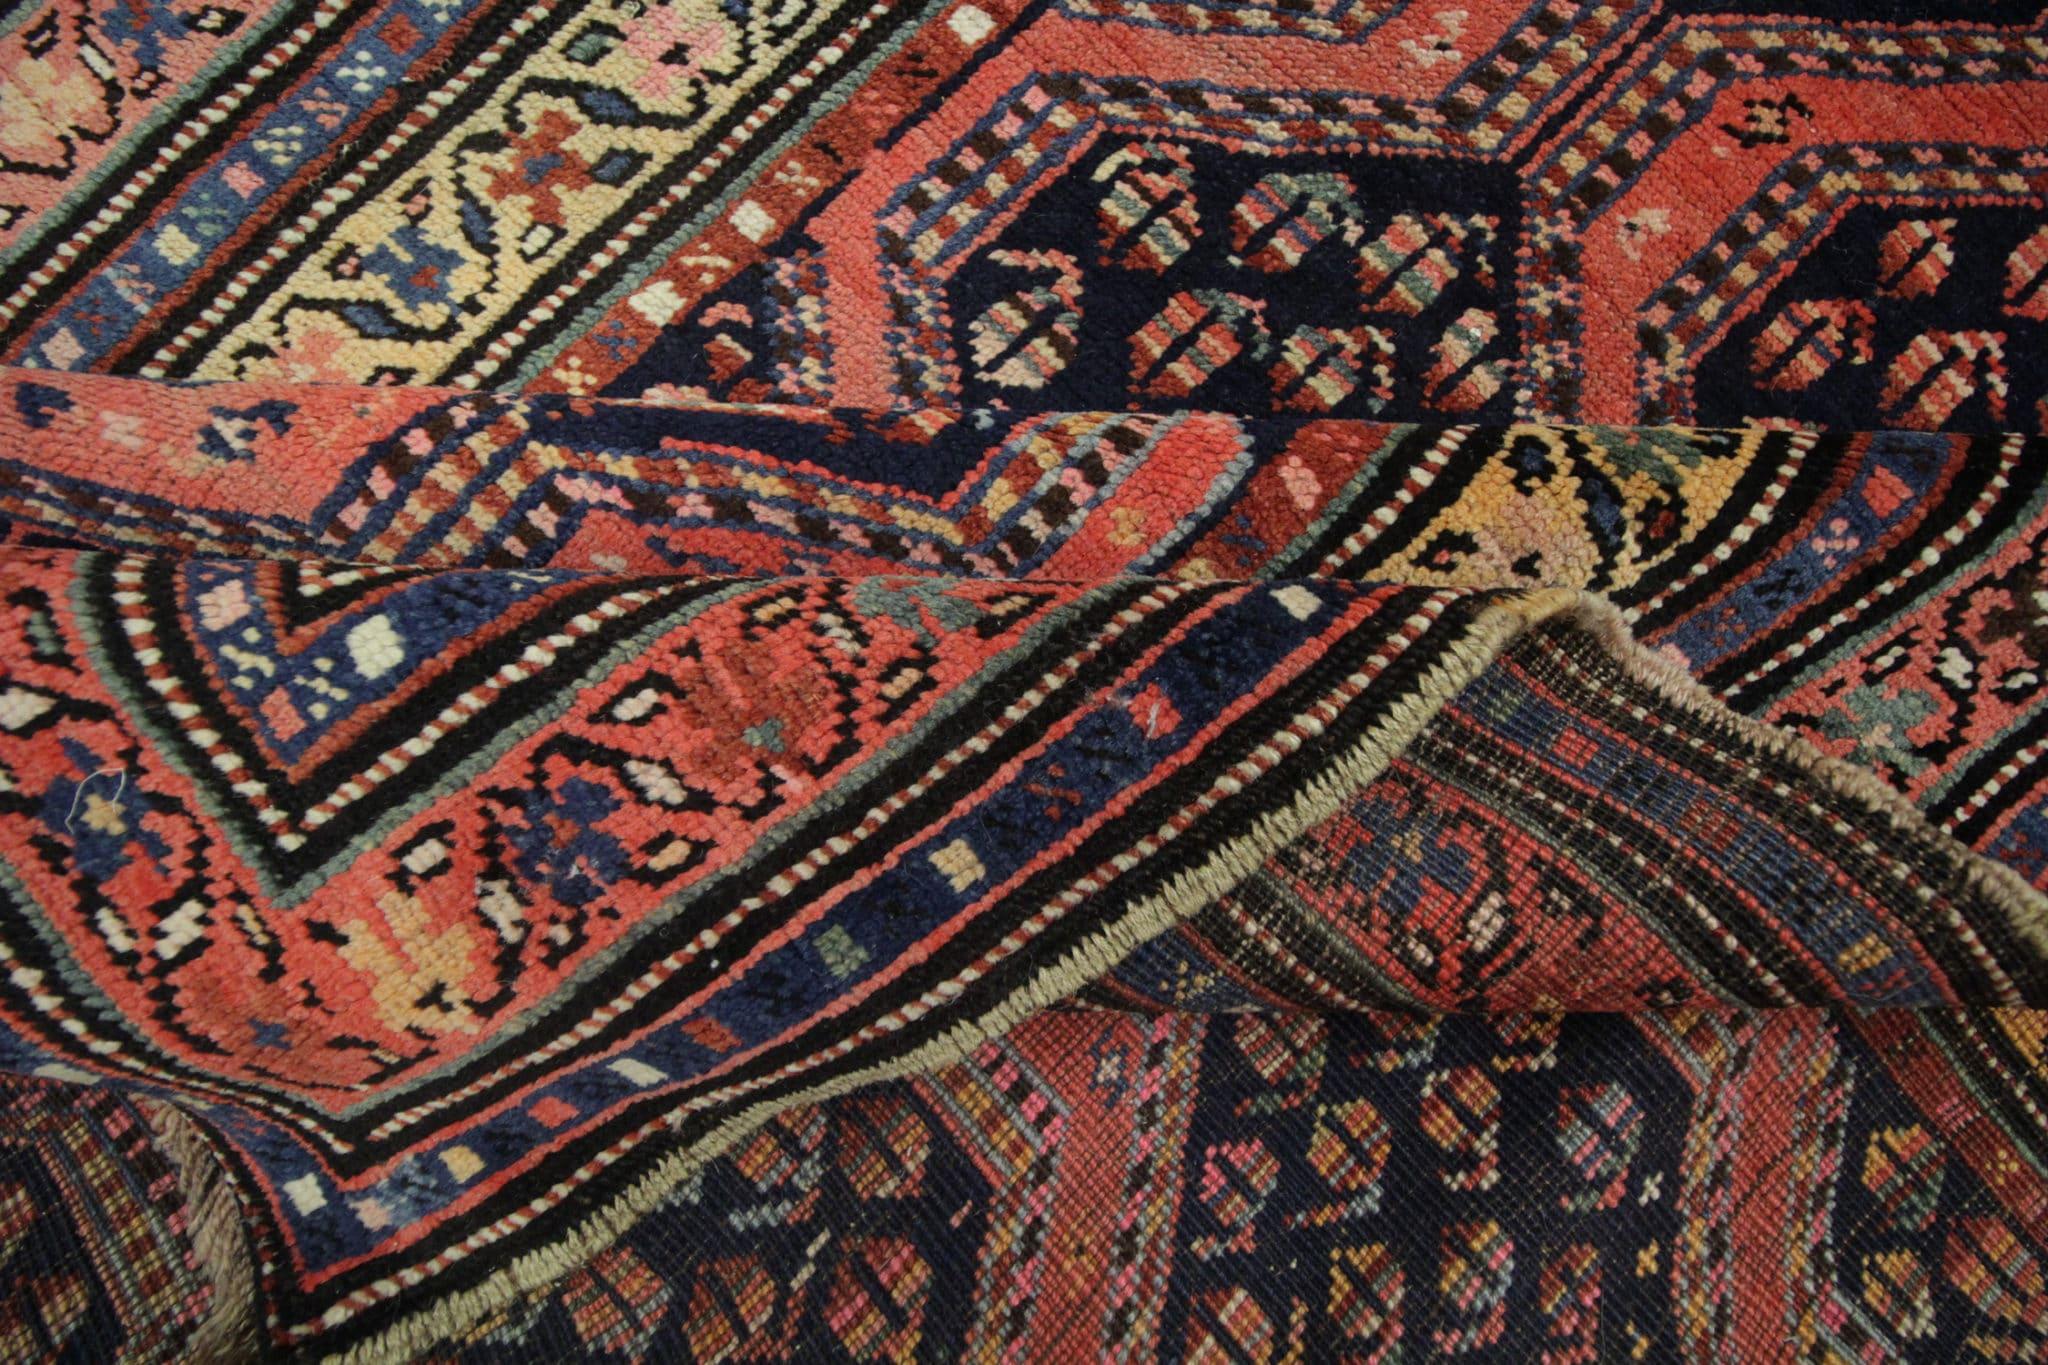 Walk into the rich history and timeless charm with our rare antique Caucasian rug. This exquisite piece boasts a captivating weave, meticulously hand knotted to perfection. Crafted in the late 1890s, its antique condition narrates tales of a bygone